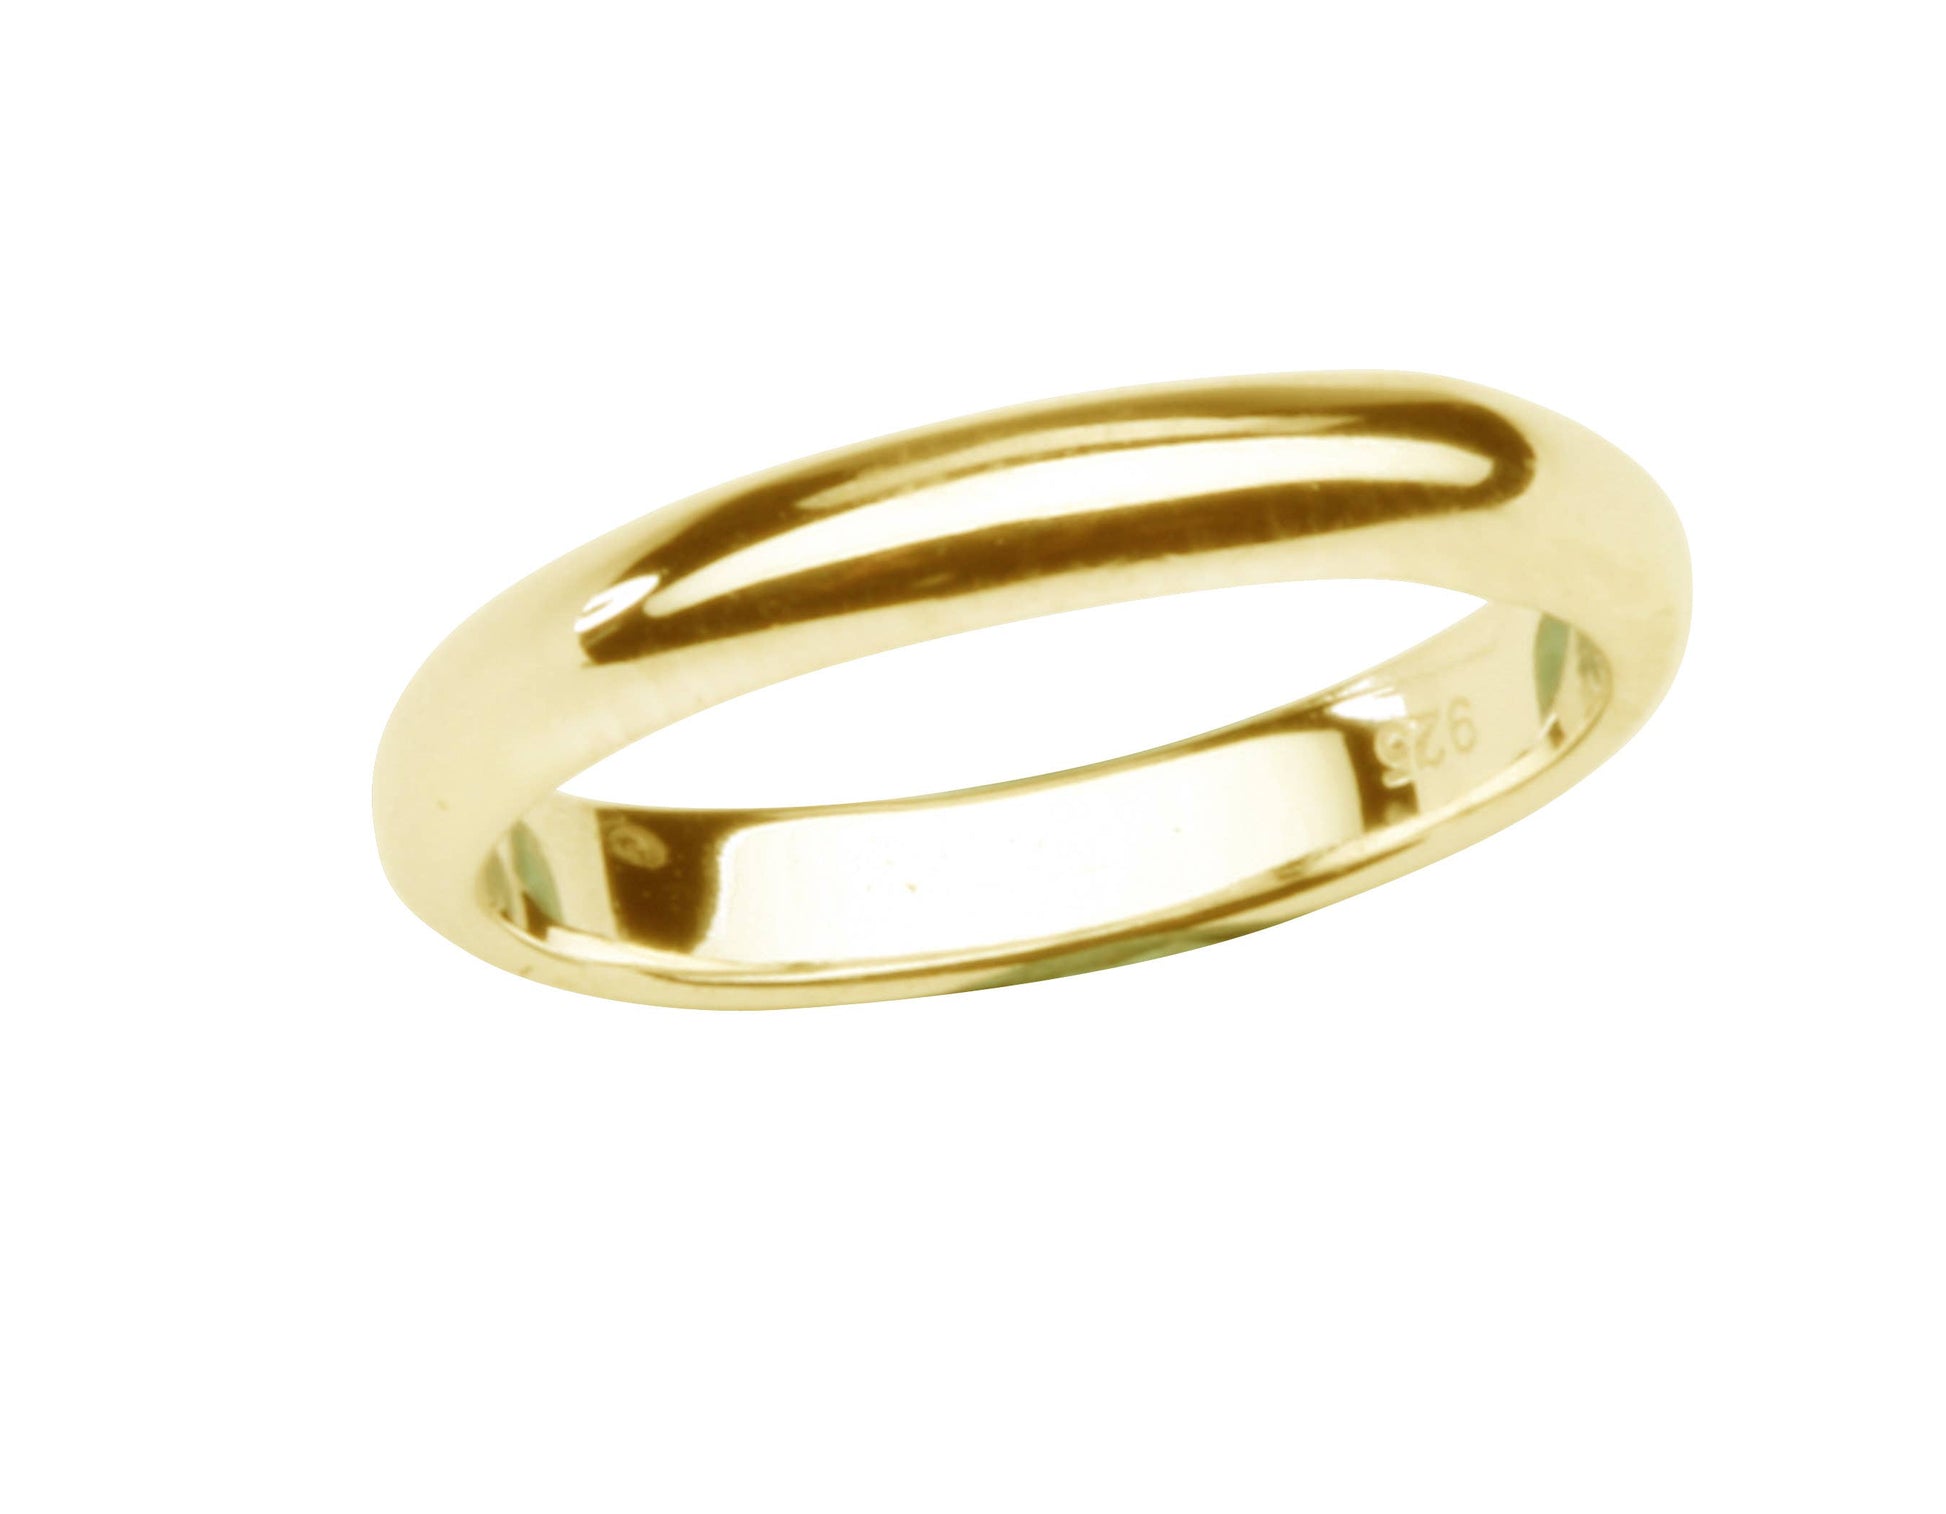 14K Gold-Plated Baby Ring - 2mm Band size 3 Kids Jewelry Cherished Moments   